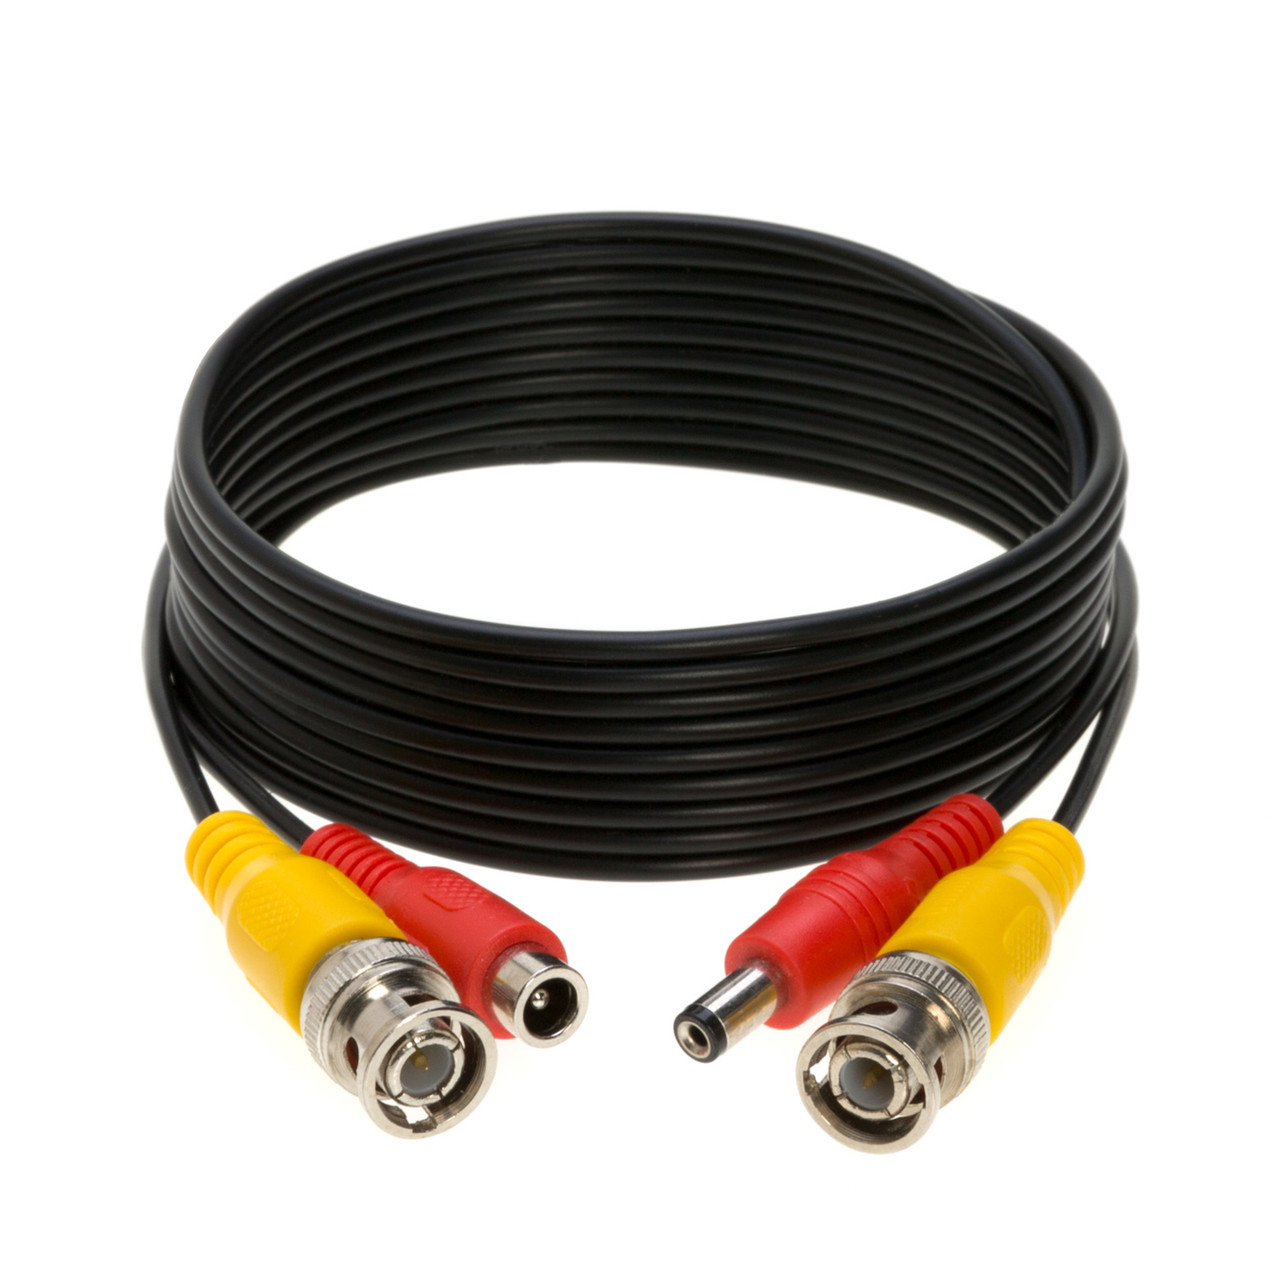 Black Security Camera Cable - Cables Direct Online